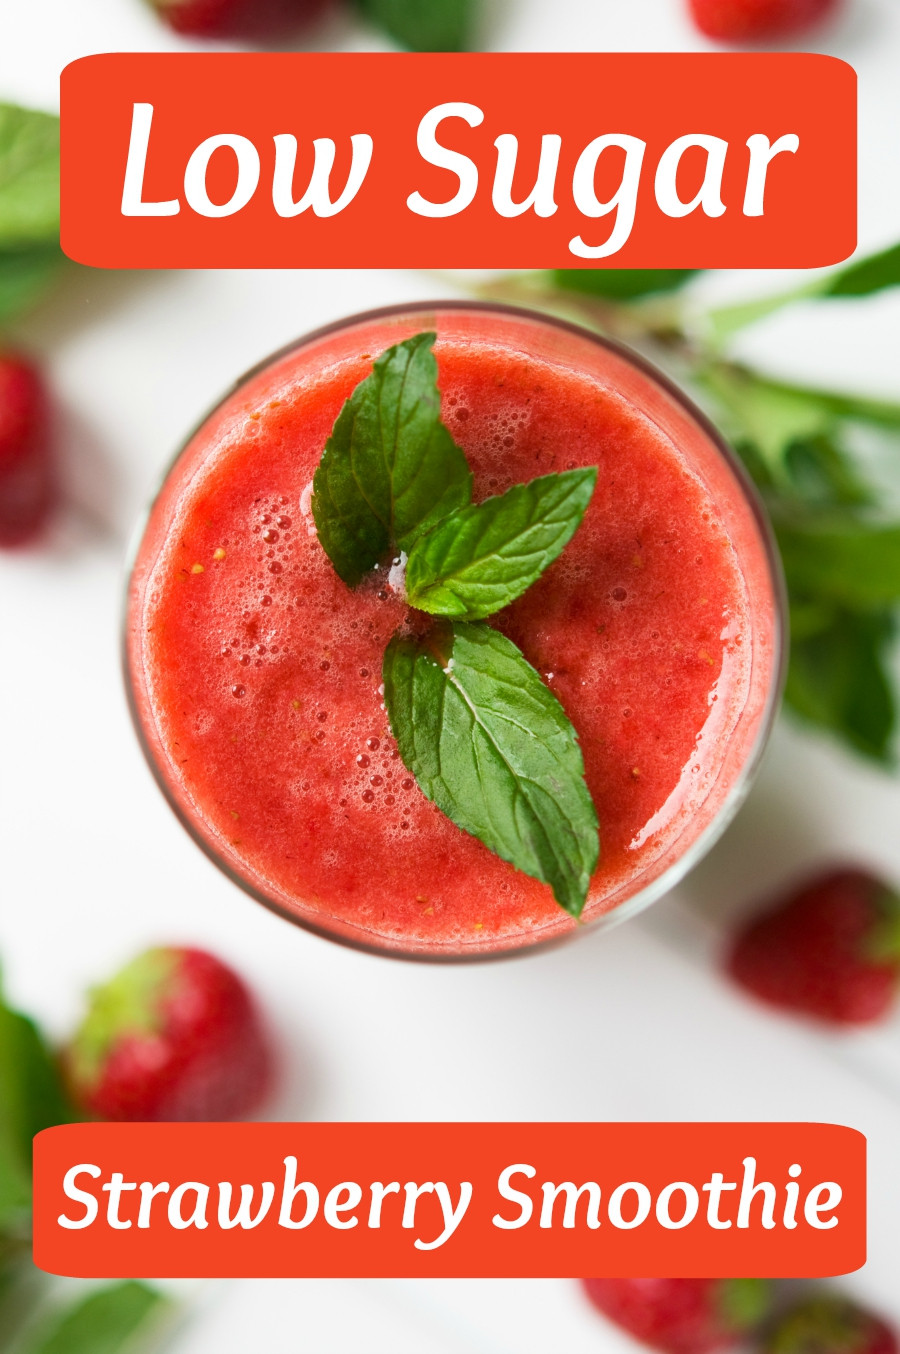 Healthy Low Sugar Smoothies
 Low Sugar Strawberry Smoothie All Nutribullet Recipes